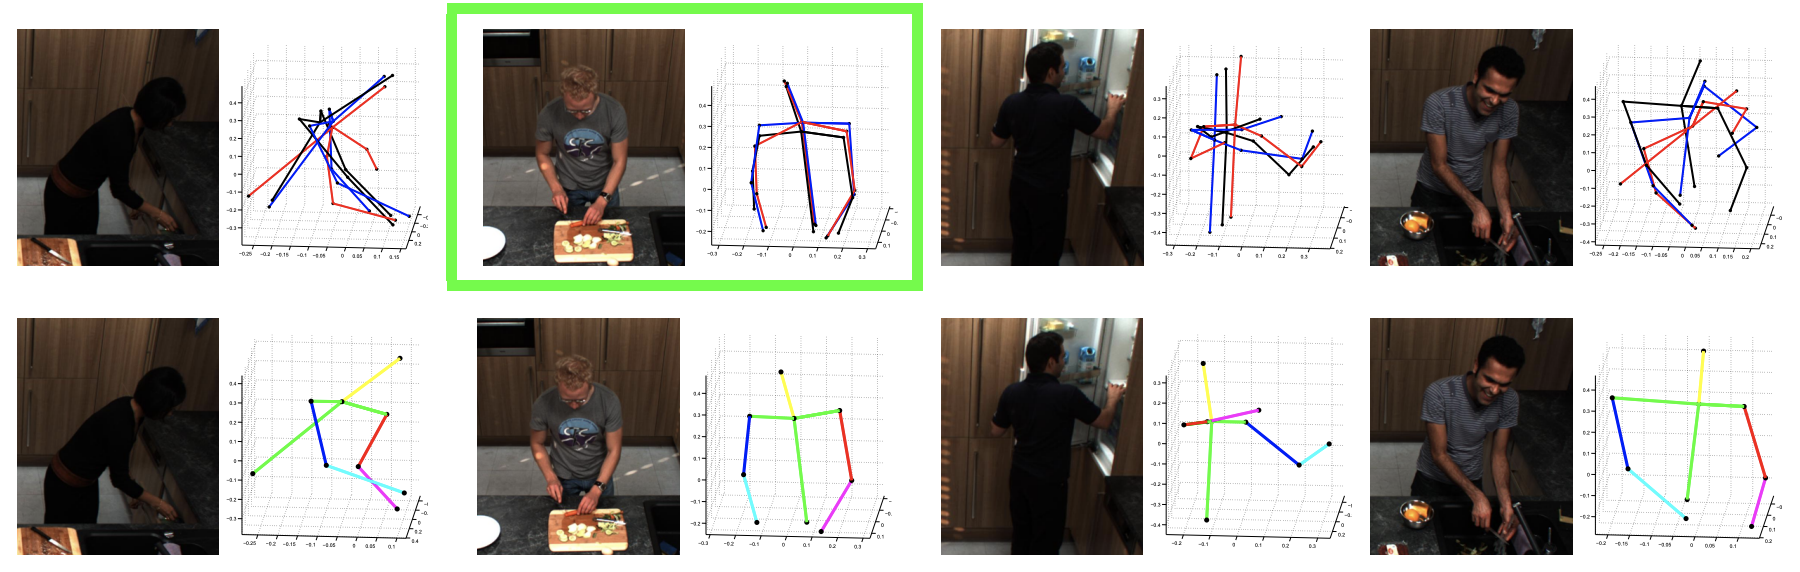 Test-time Adaptation for 3D Human Pose Estimation | Perceptual User  Interfaces